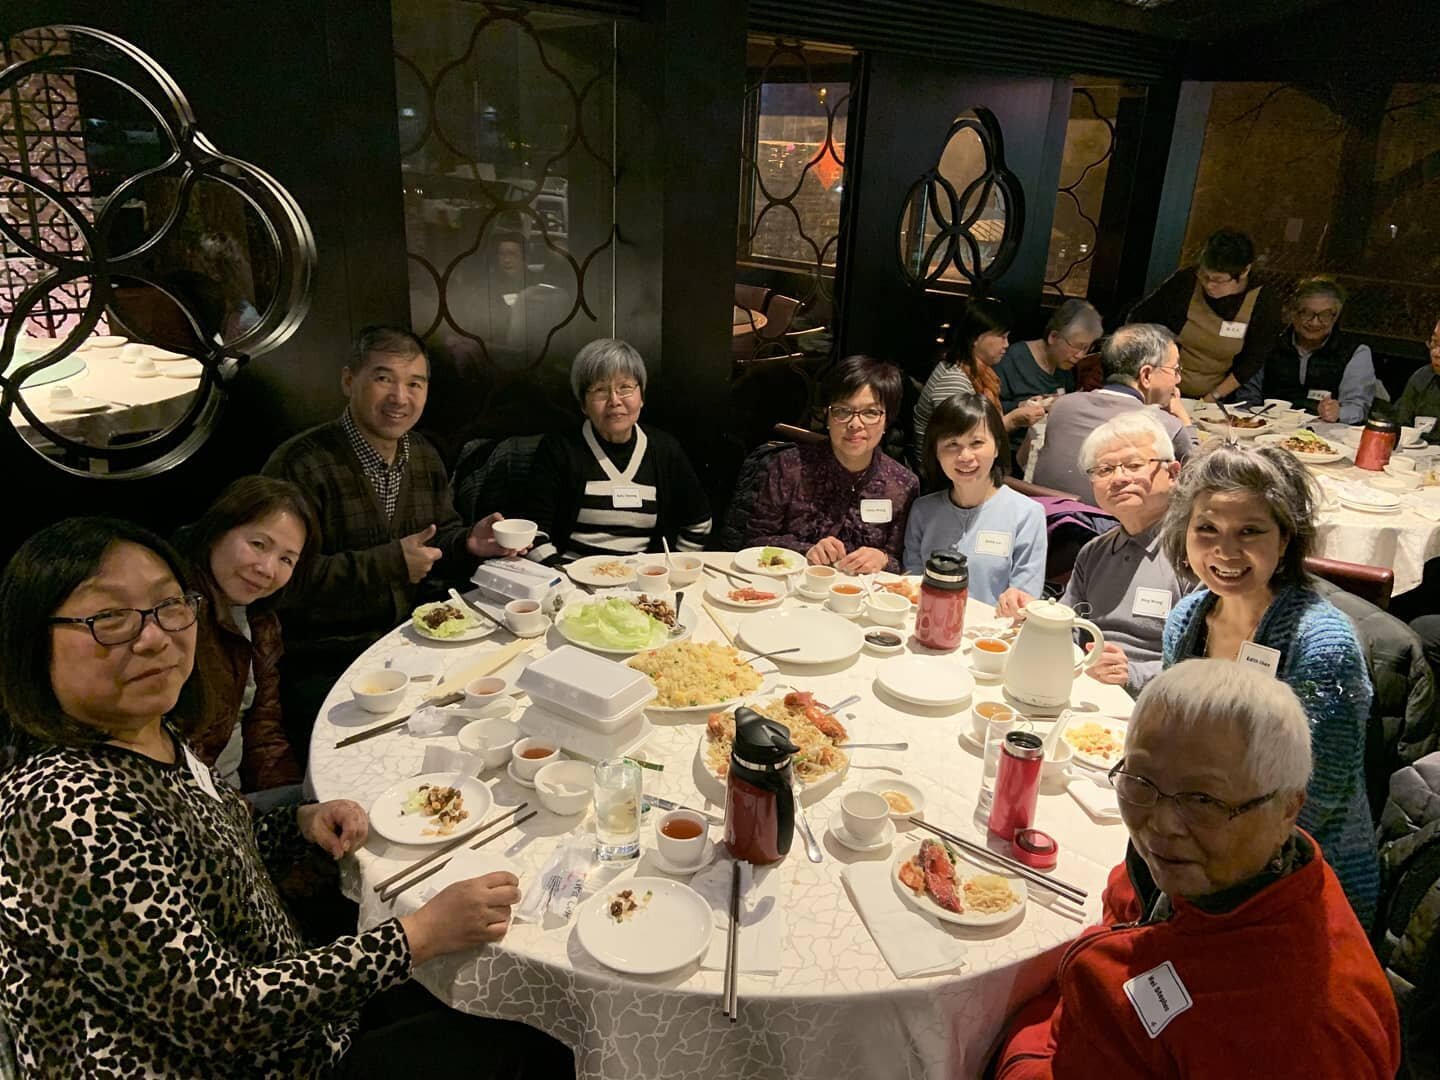 Enoch Society Care for the Aging Anniversary Dinner: March 2nd, 2020 at Again Legend (Part 2)